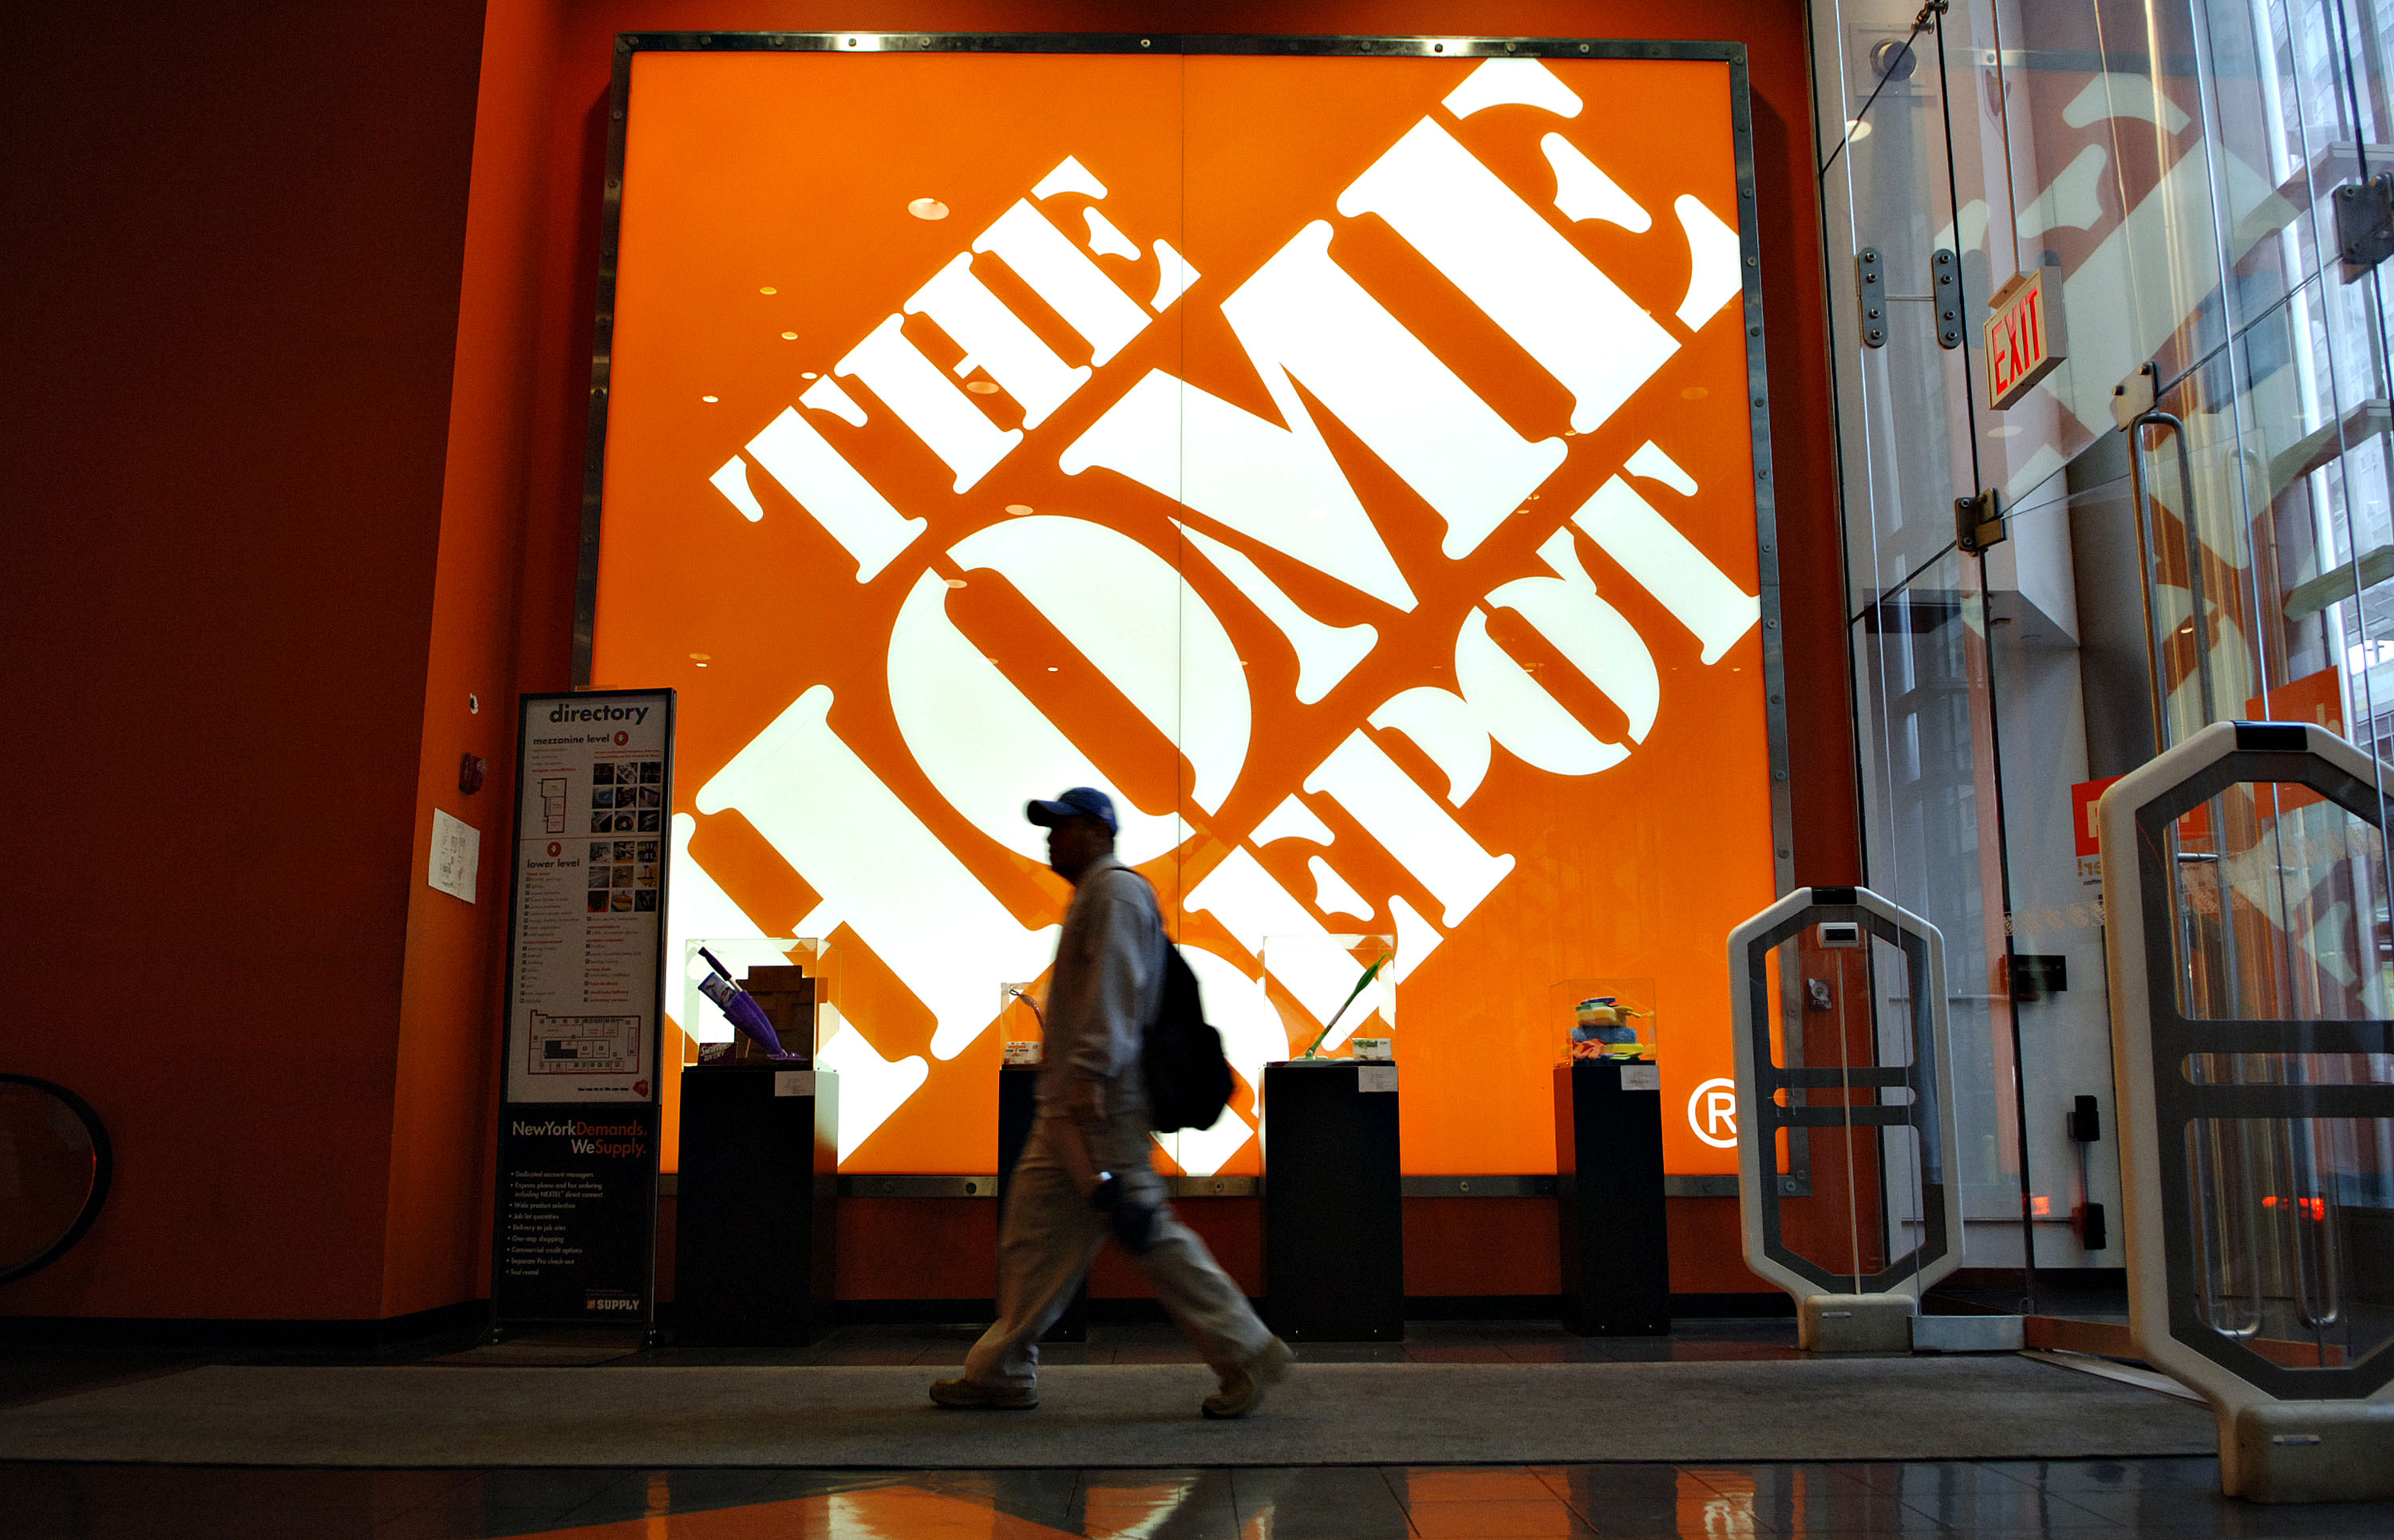 A shopper walks past a large Home Depot logo inside a store in New York on May 16, 2006 (Bloomberg/Getty Images)